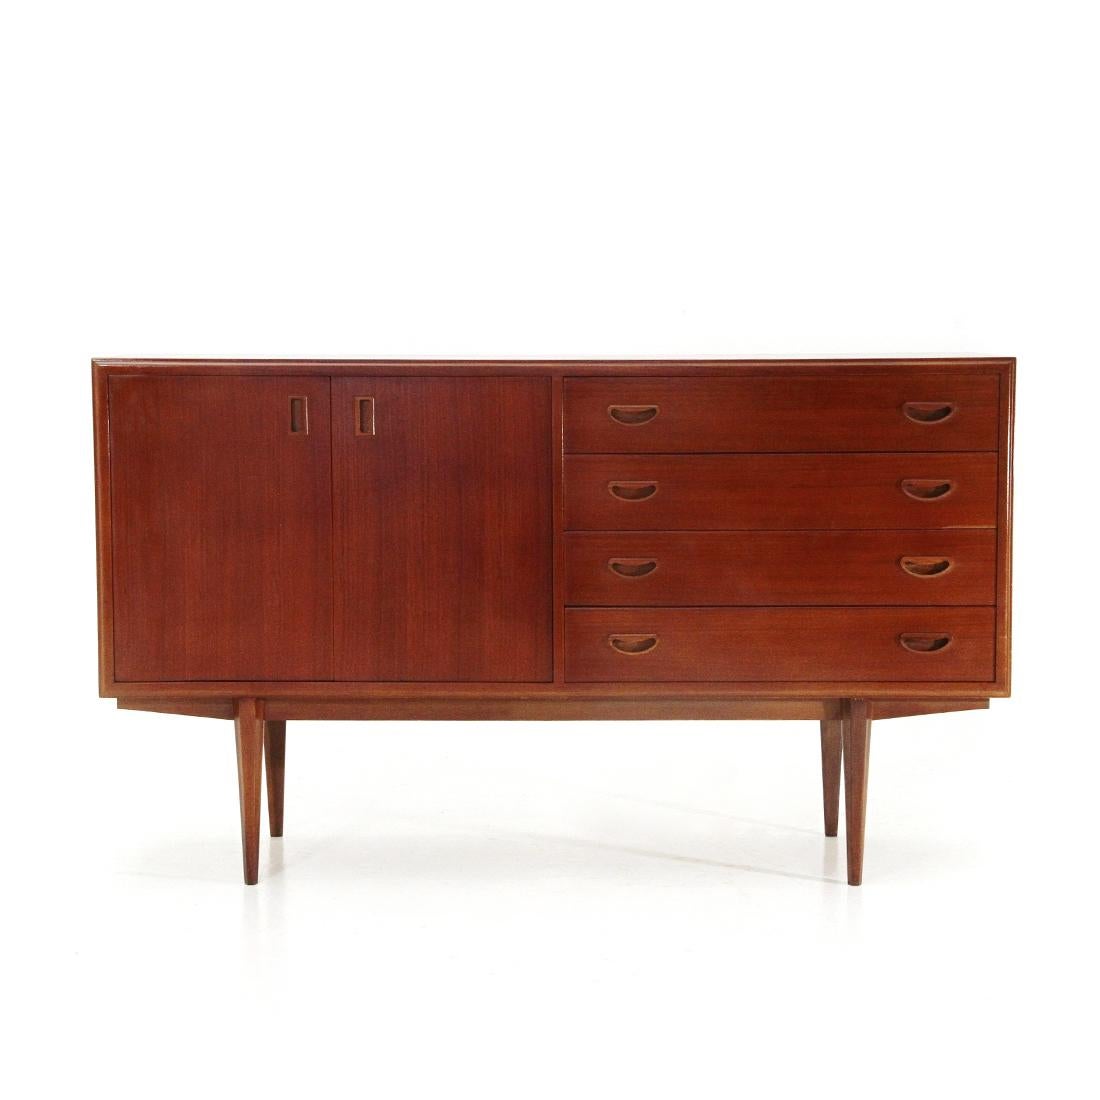 Italian Sideboard with Drawers, 1960s